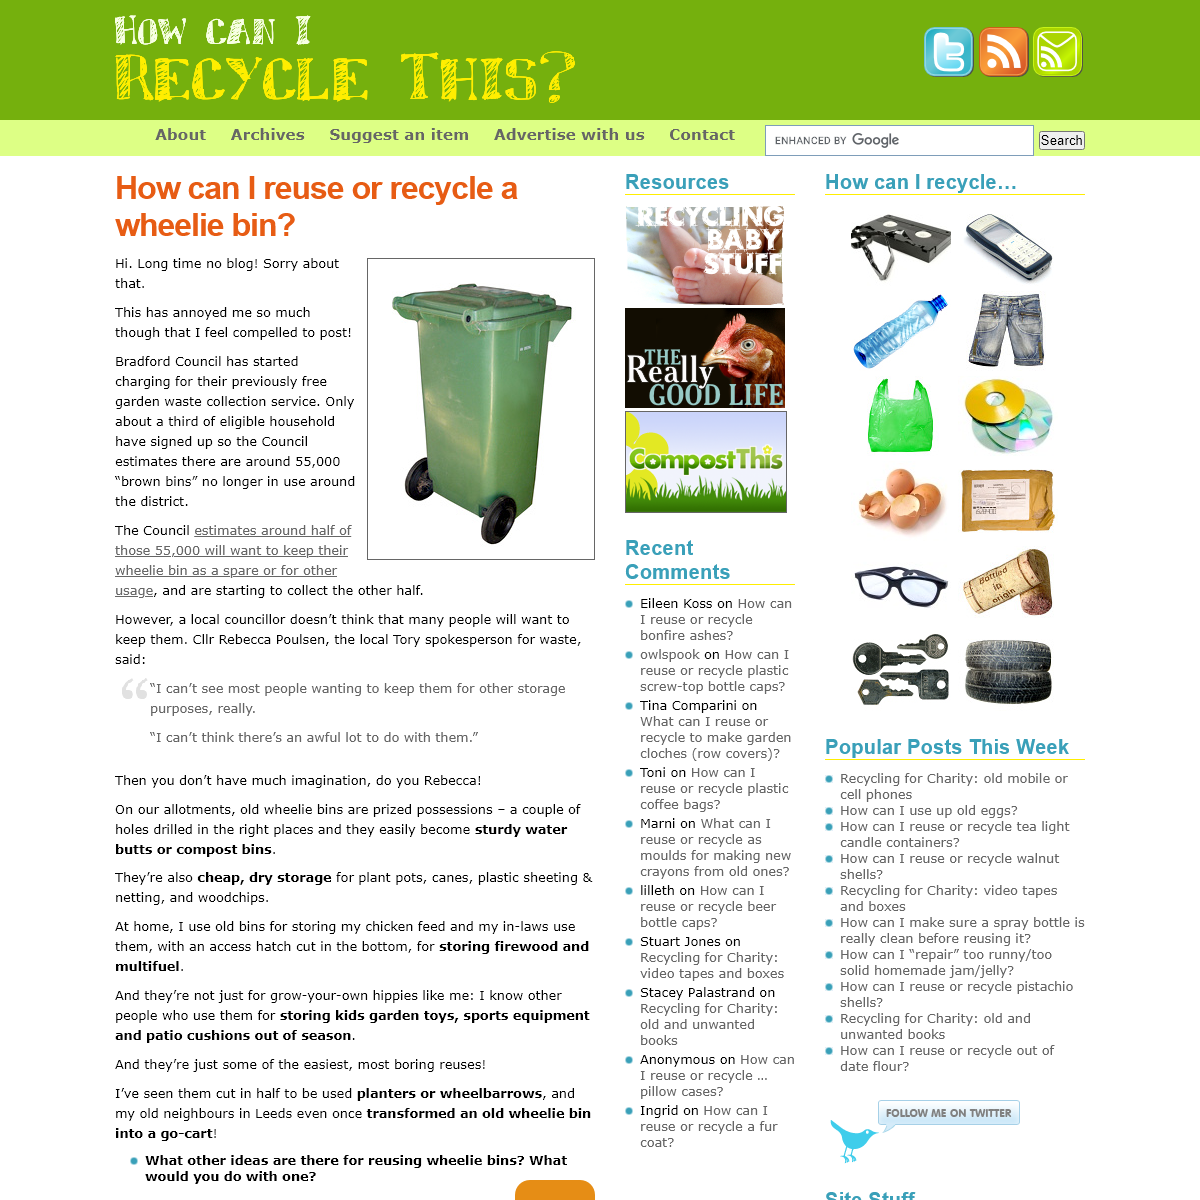 A complete backup of recyclethis.co.uk